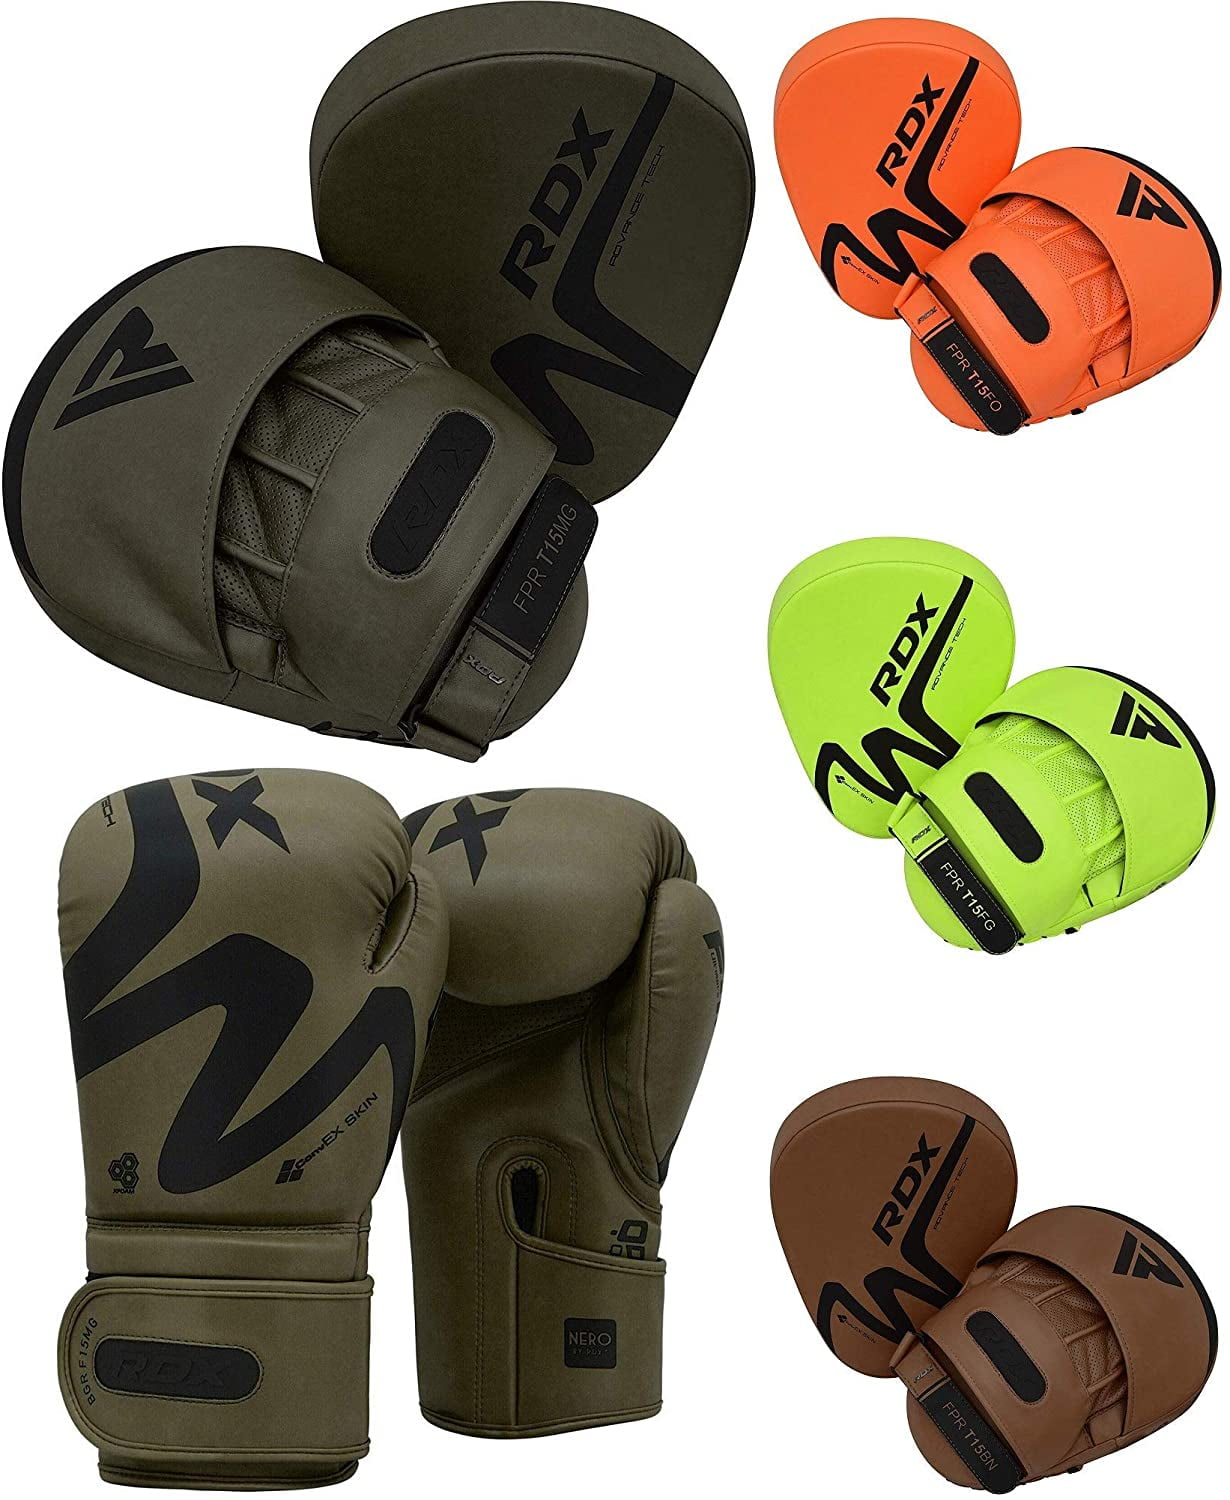 Leather Focus Pads Martial Arts MMA Boxing Mitts Punch Pad Training Gloves 